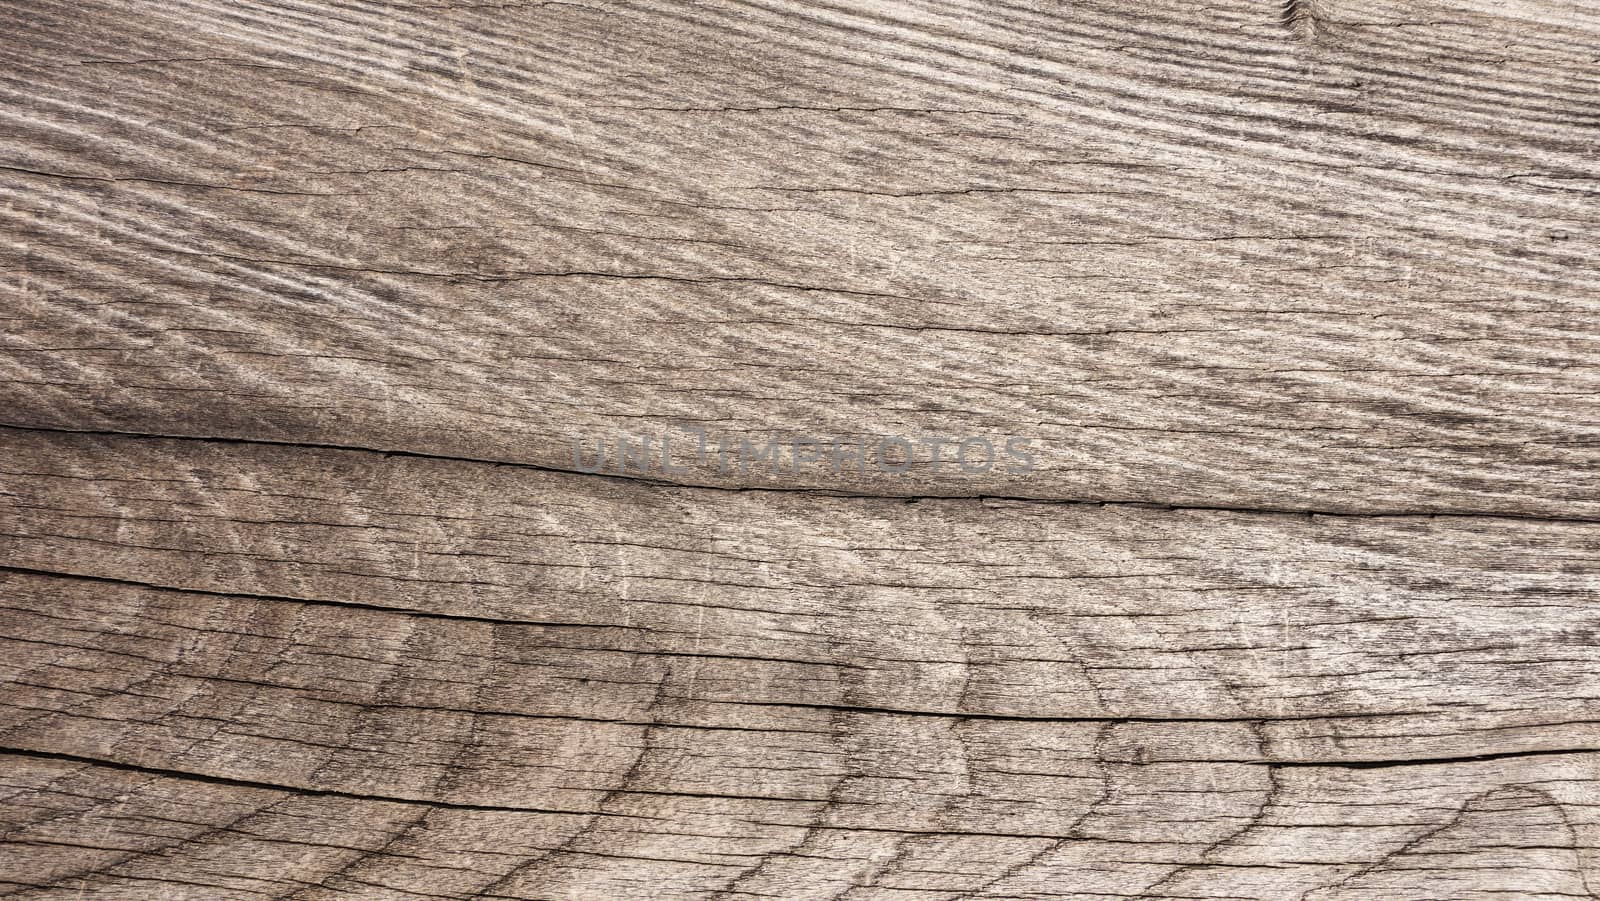 Dark wood texture background surface with old natural pattern or dark wood texture table top view. Grunge surface with wood texture background. Vintage timber texture background. Rustic table top view. old wood texture with natural pattern